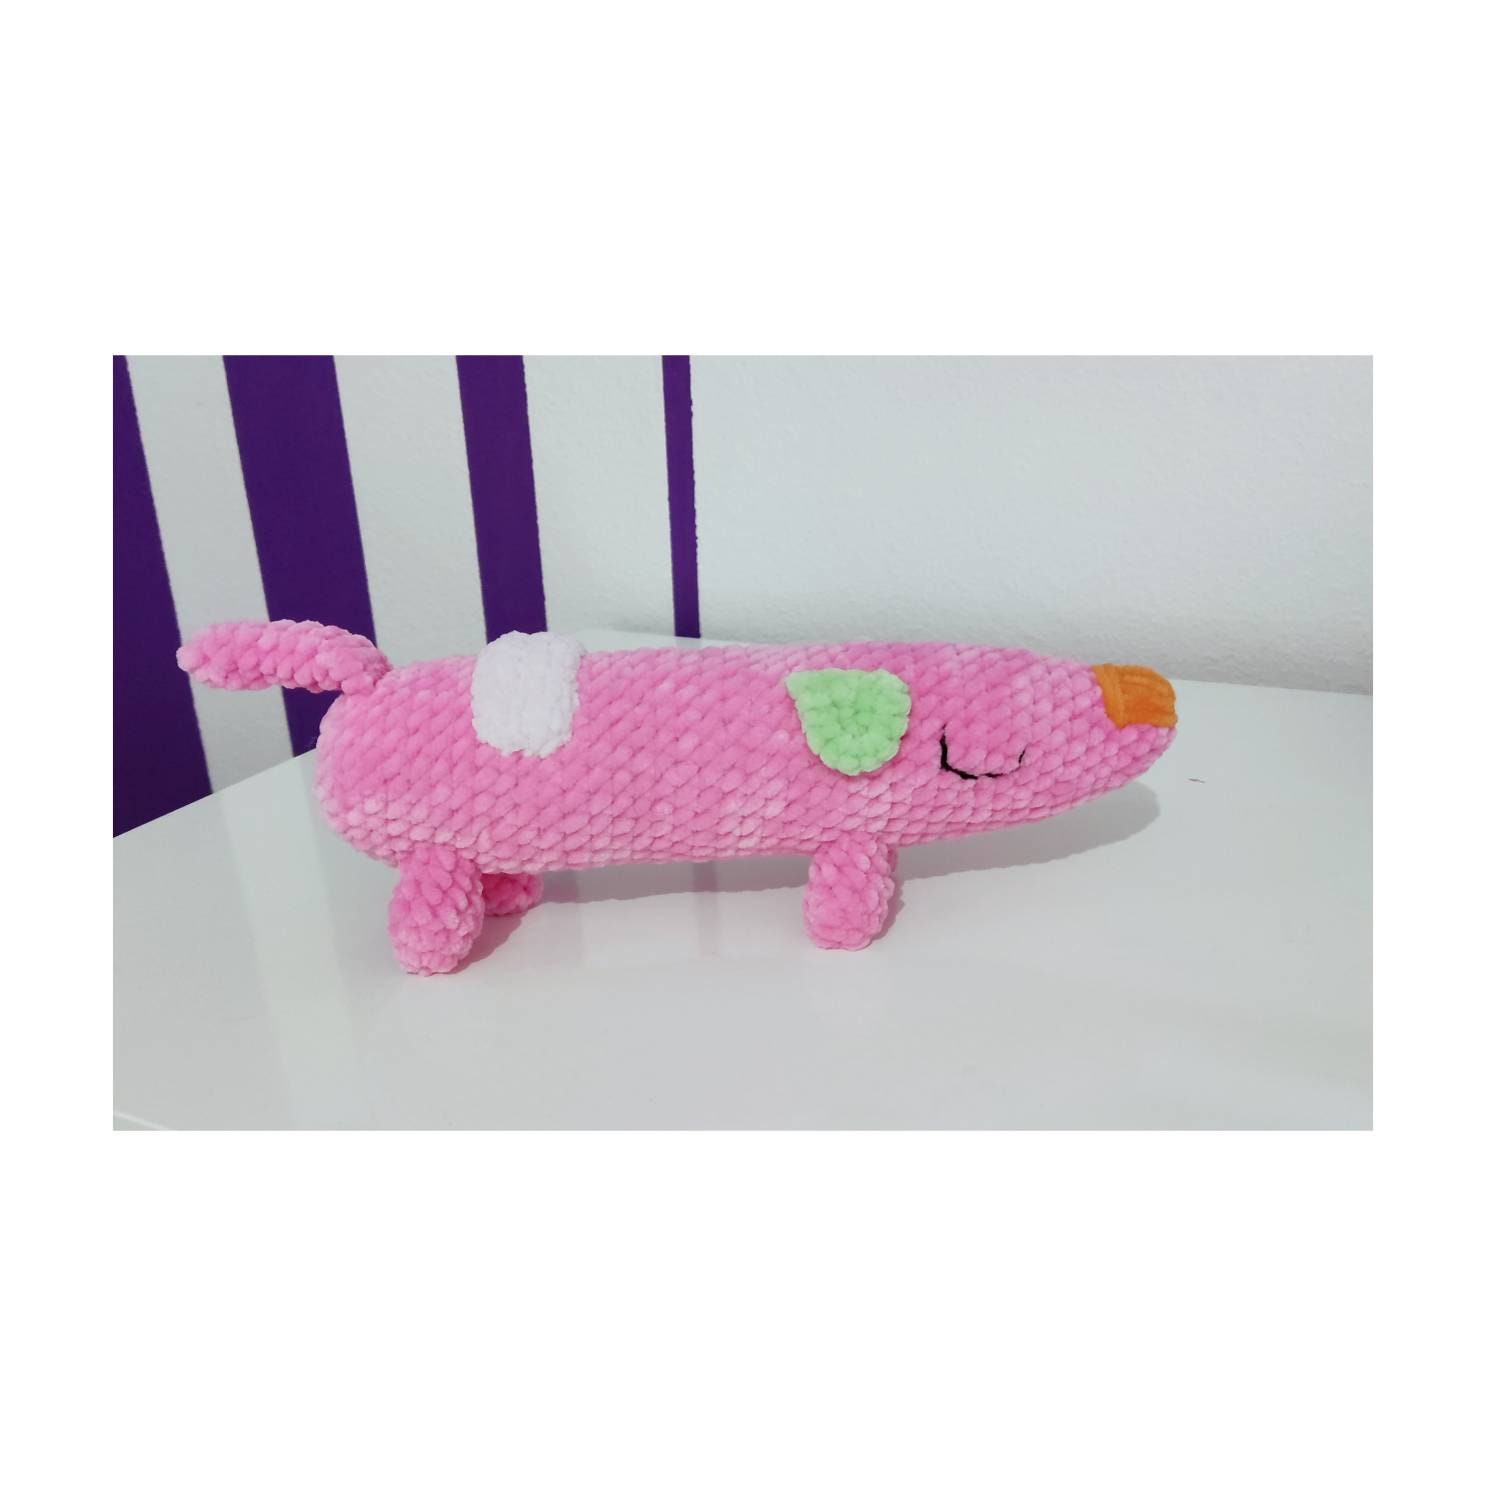 Midlee Easter Egg Plush Dog Toy - Pink (Small)